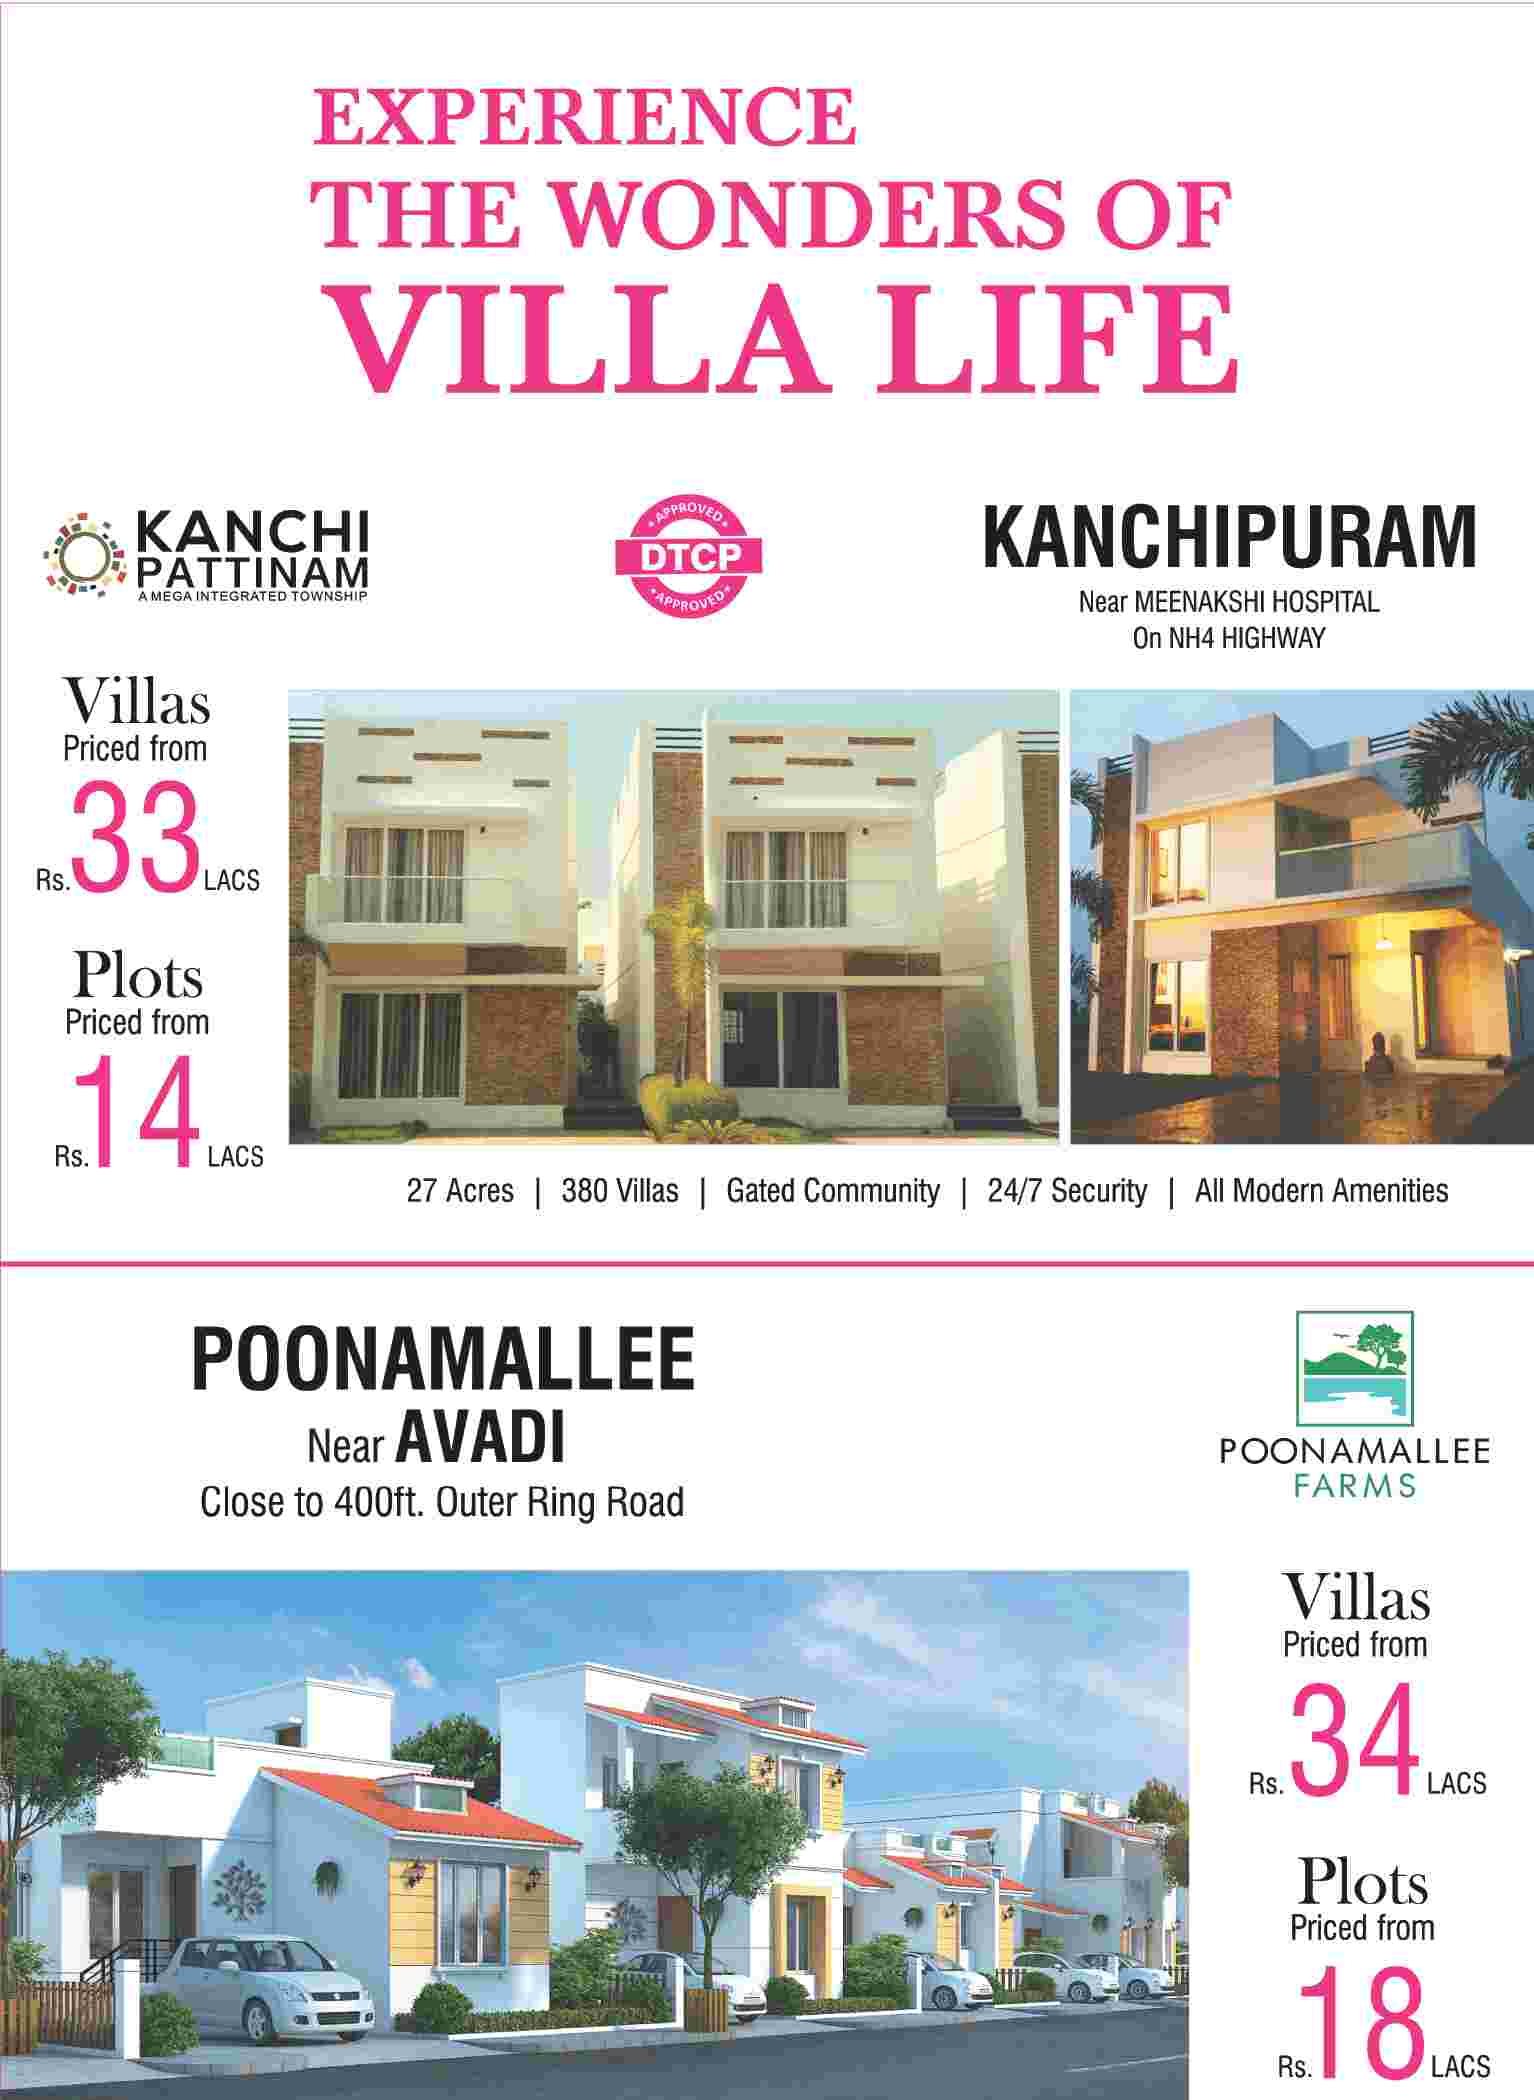 Experience the wonders of villa life at Colorhomes properties in Chennai